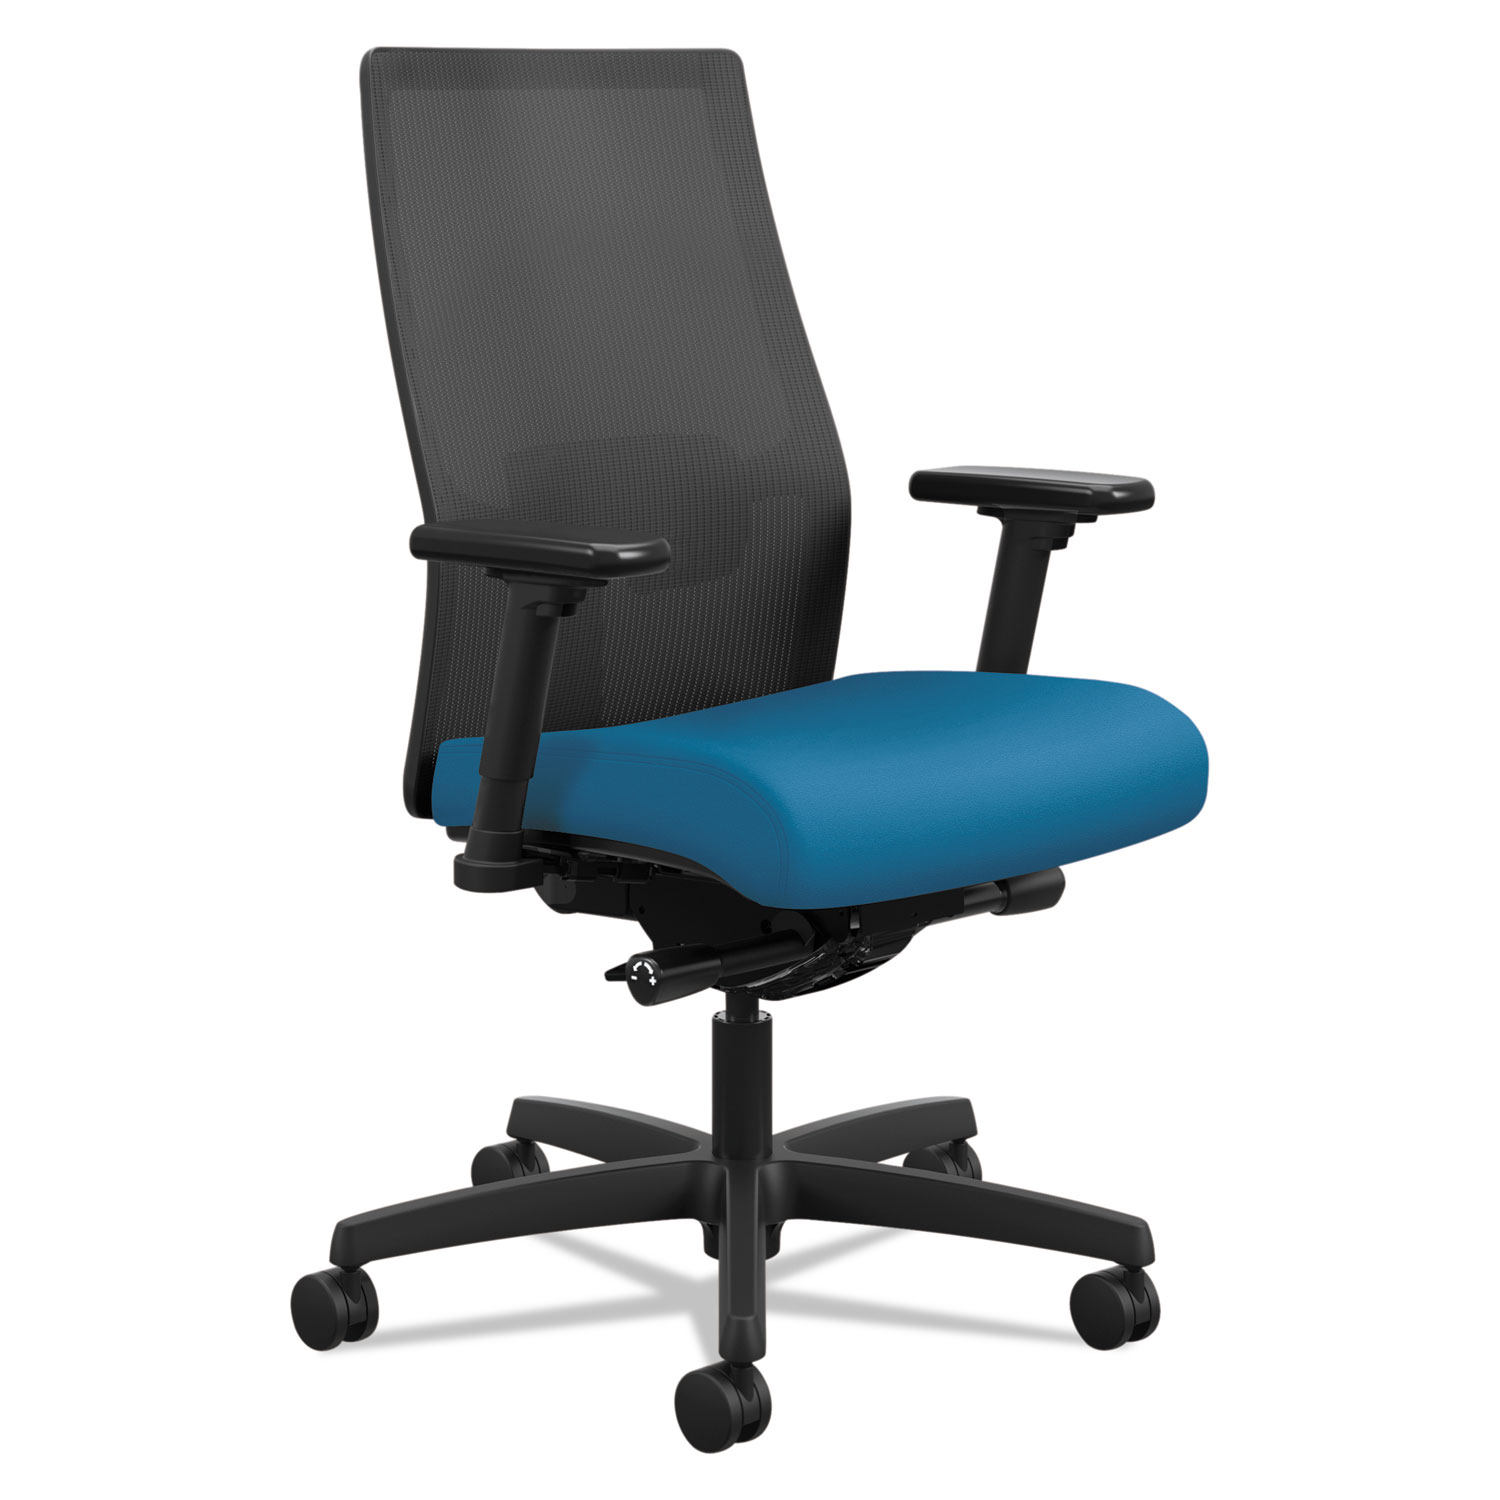  HON HONI2M2AMLC97TK Ignition 2.0 4-Way Stretch Mid-Back Mesh Task Chair, Supports up to 300 lbs., Peacock Seat, Black Back, Black Base (HONI2M2AMLC97TK) 